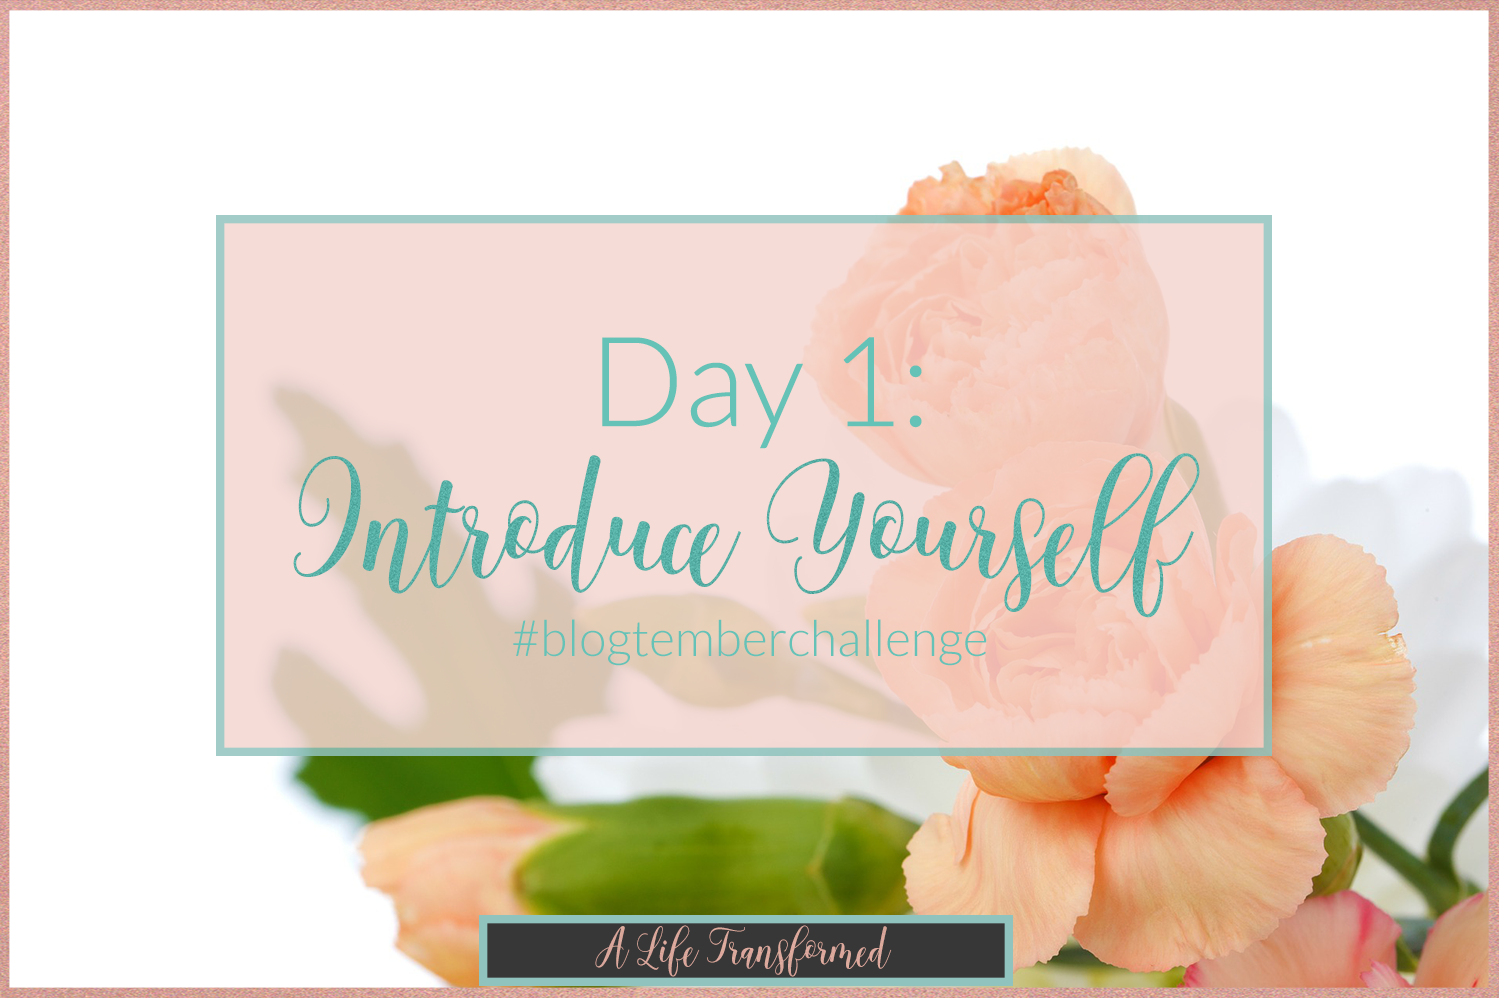 Day-1-Introduce-Yourself-blogtemberchallenge